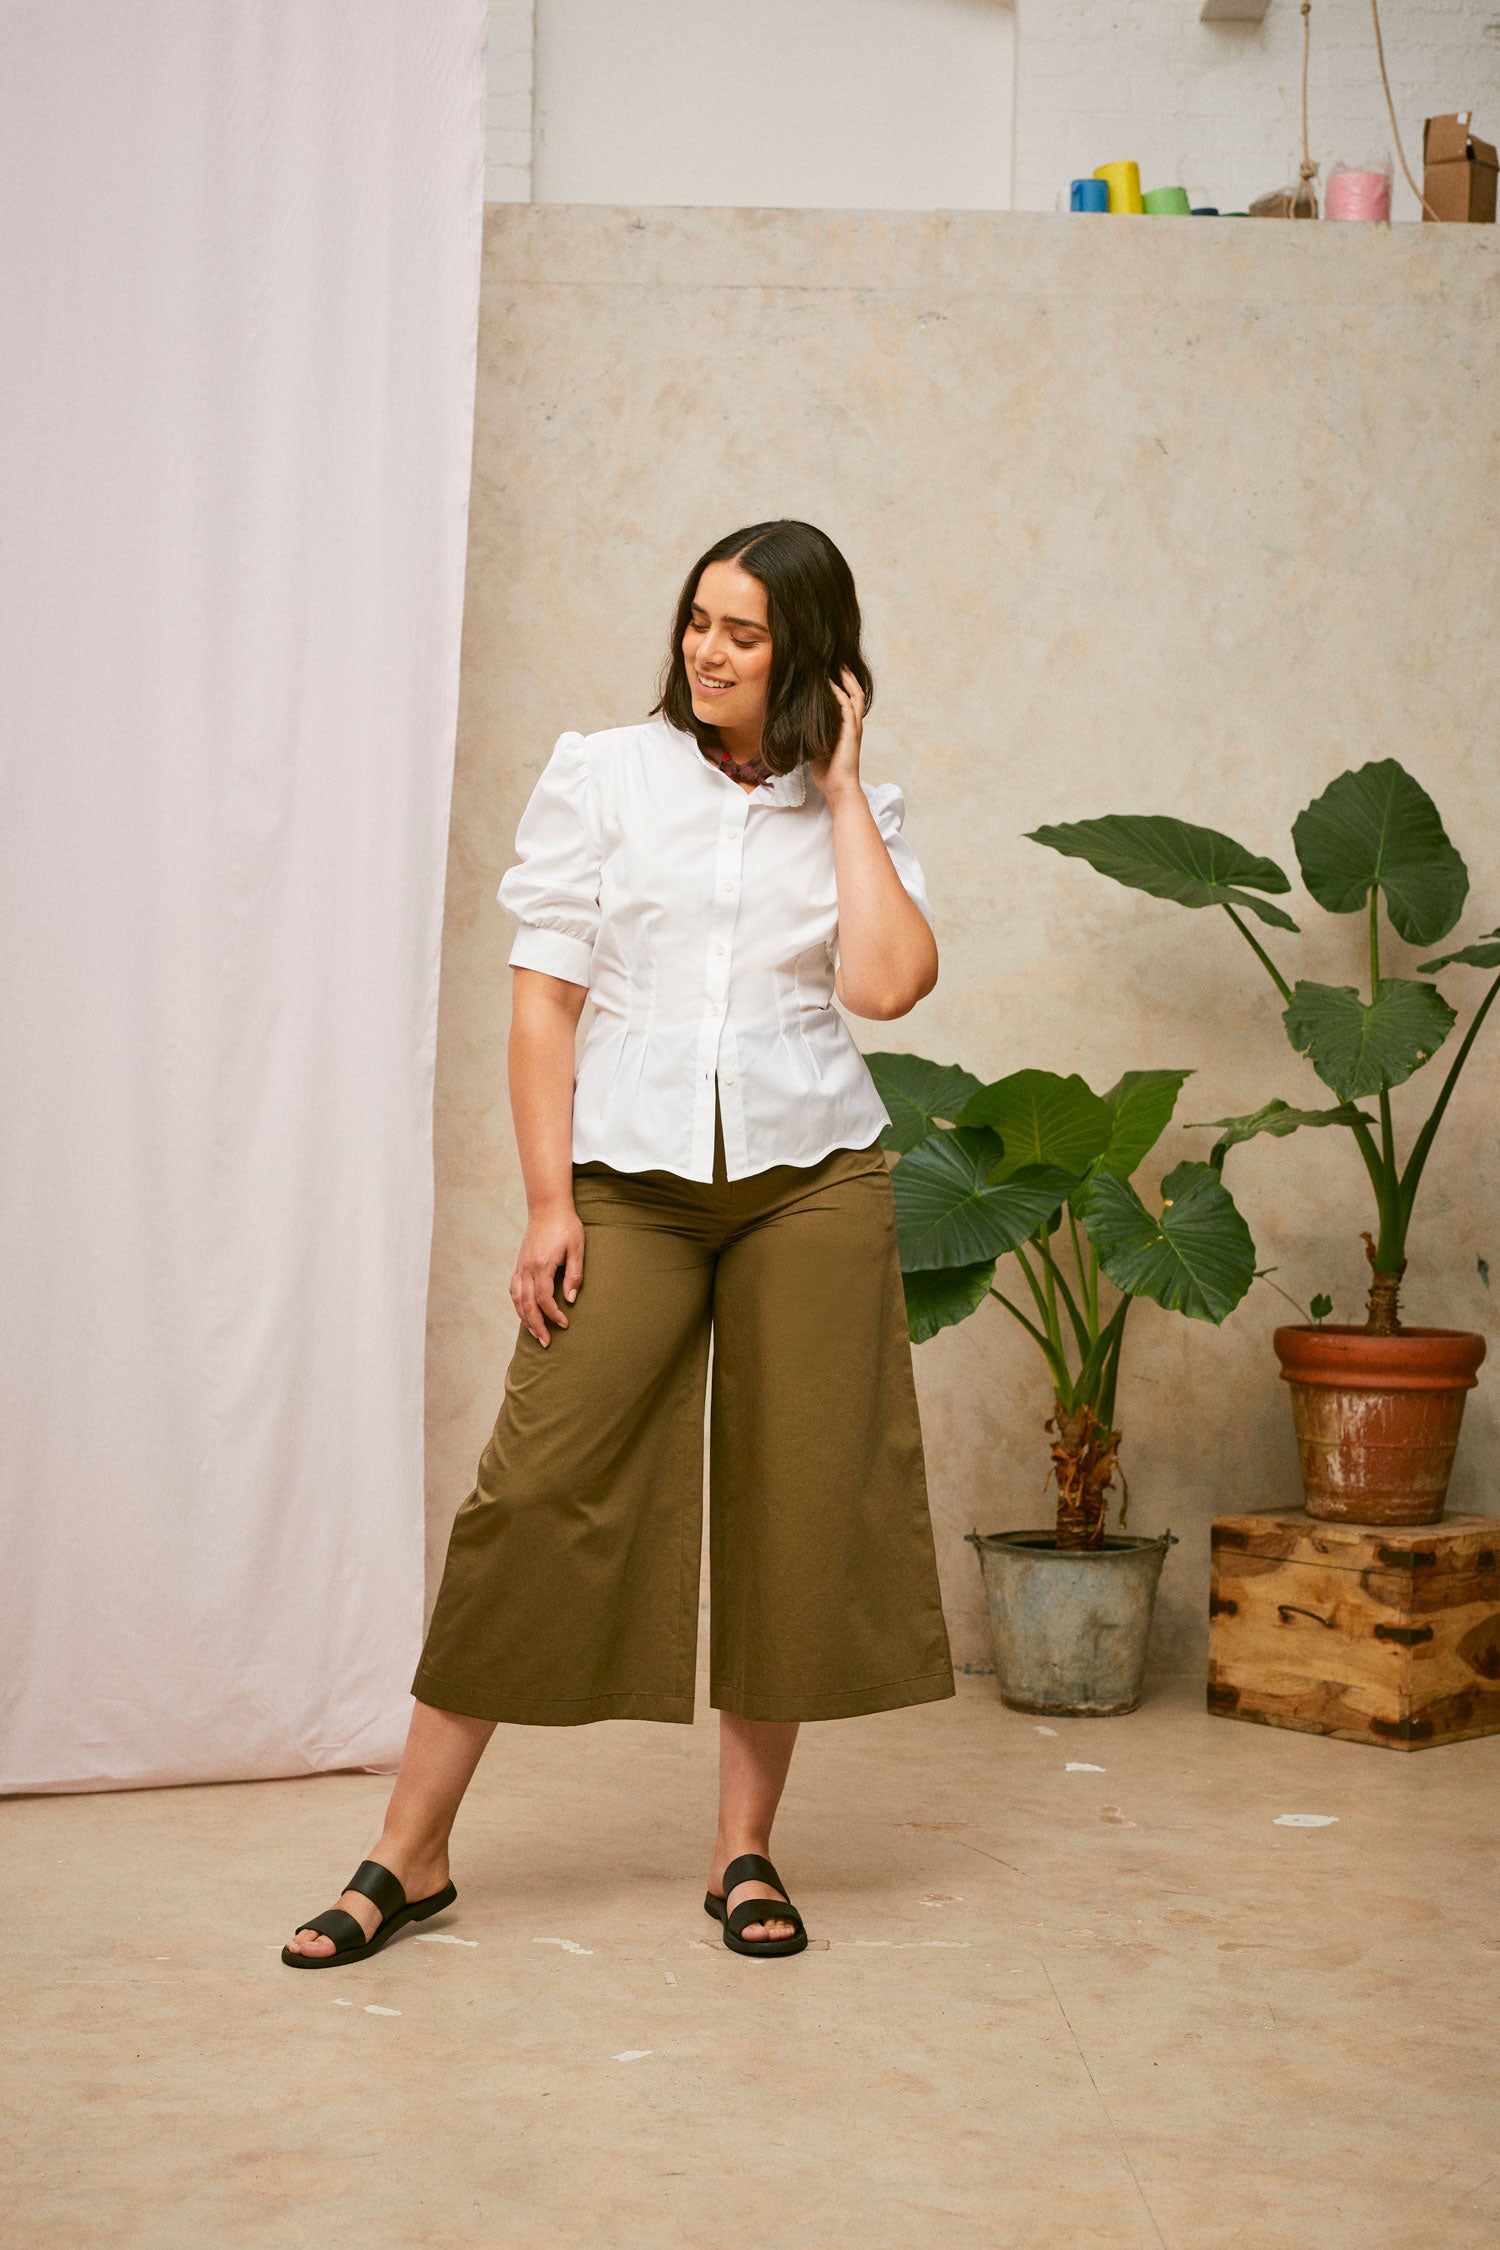 Model stands smiling, wearing Saywood's Joni puff sleeve blouse in white with scalloped hem, worn with khaki Amelia wide leg trousers and black sandals. A plant and drop of pink fabric can be seen in the background. 